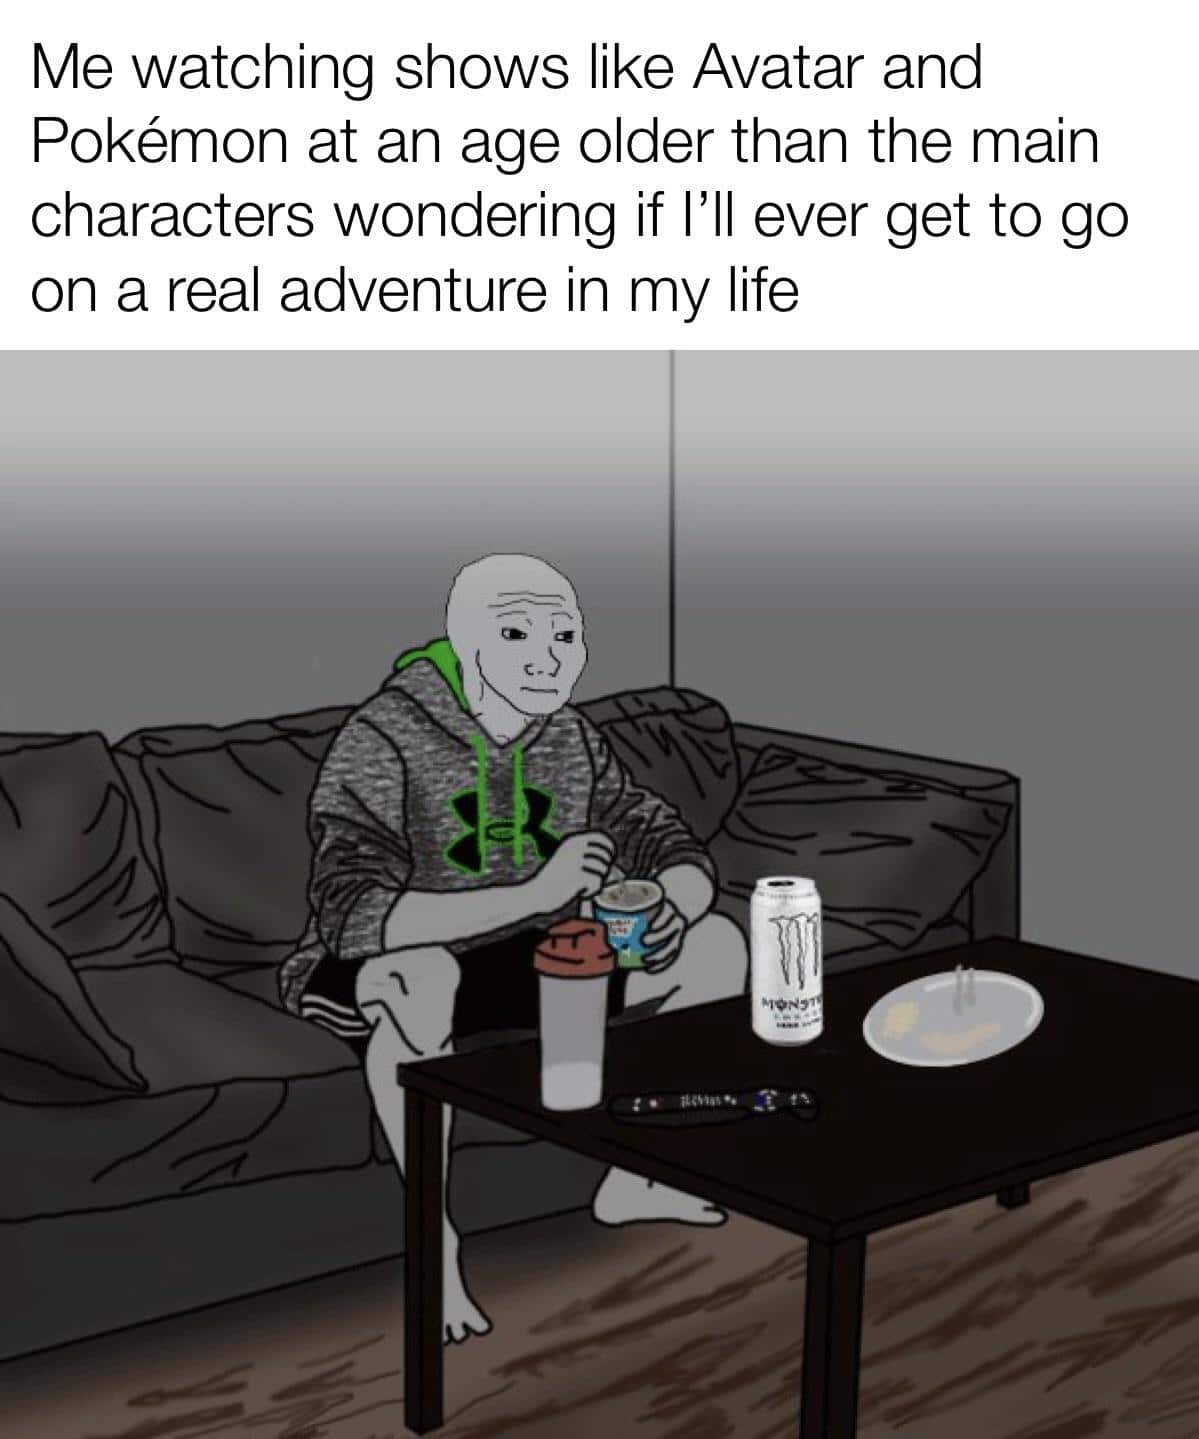 Funny, Surely, Ash, Jerry, Ben, Avatar other memes Funny, Surely, Ash, Jerry, Ben, Avatar text: Me watching shows like Avatar and Pokémon at an age older than the main characters wondering if I'll ever get to go on a real adventure in my life 